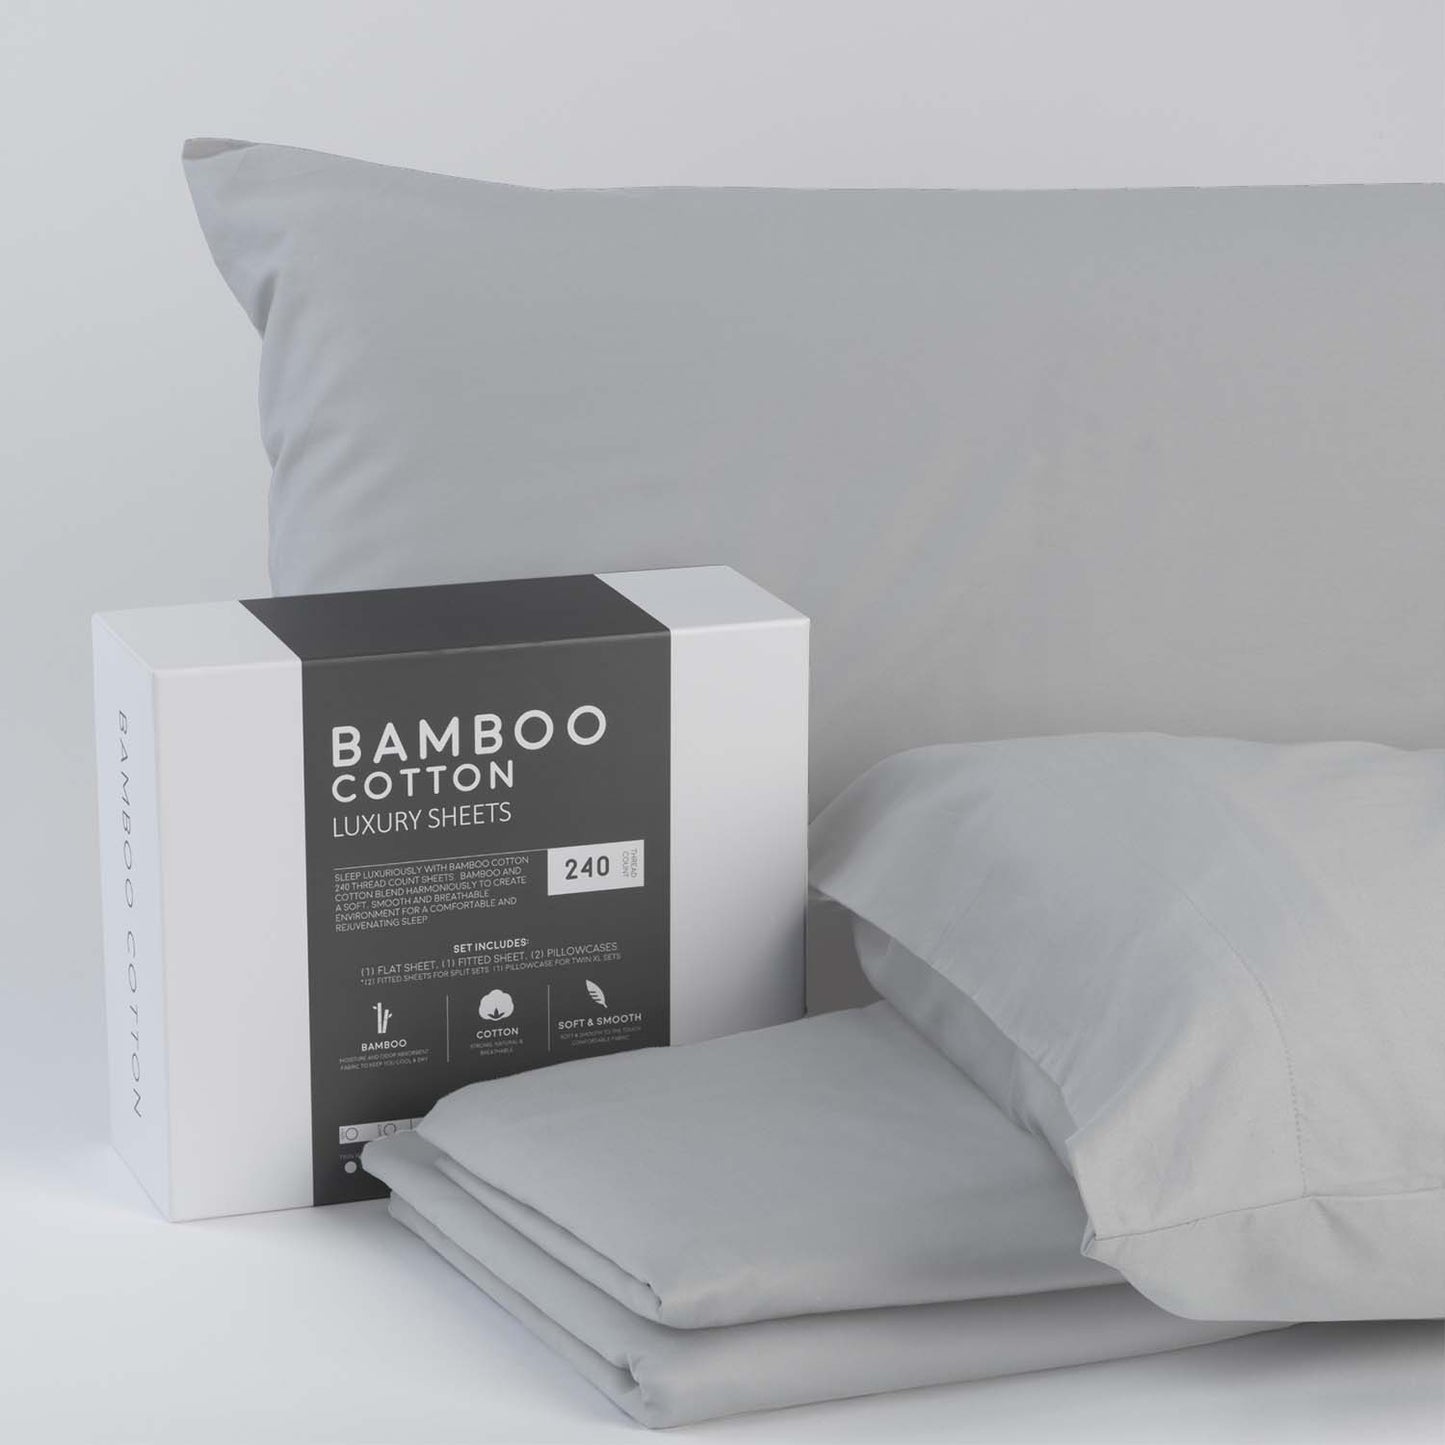 Bamboo Cotton Luxury Bed Sheets - Made with Viscose from Bamboo